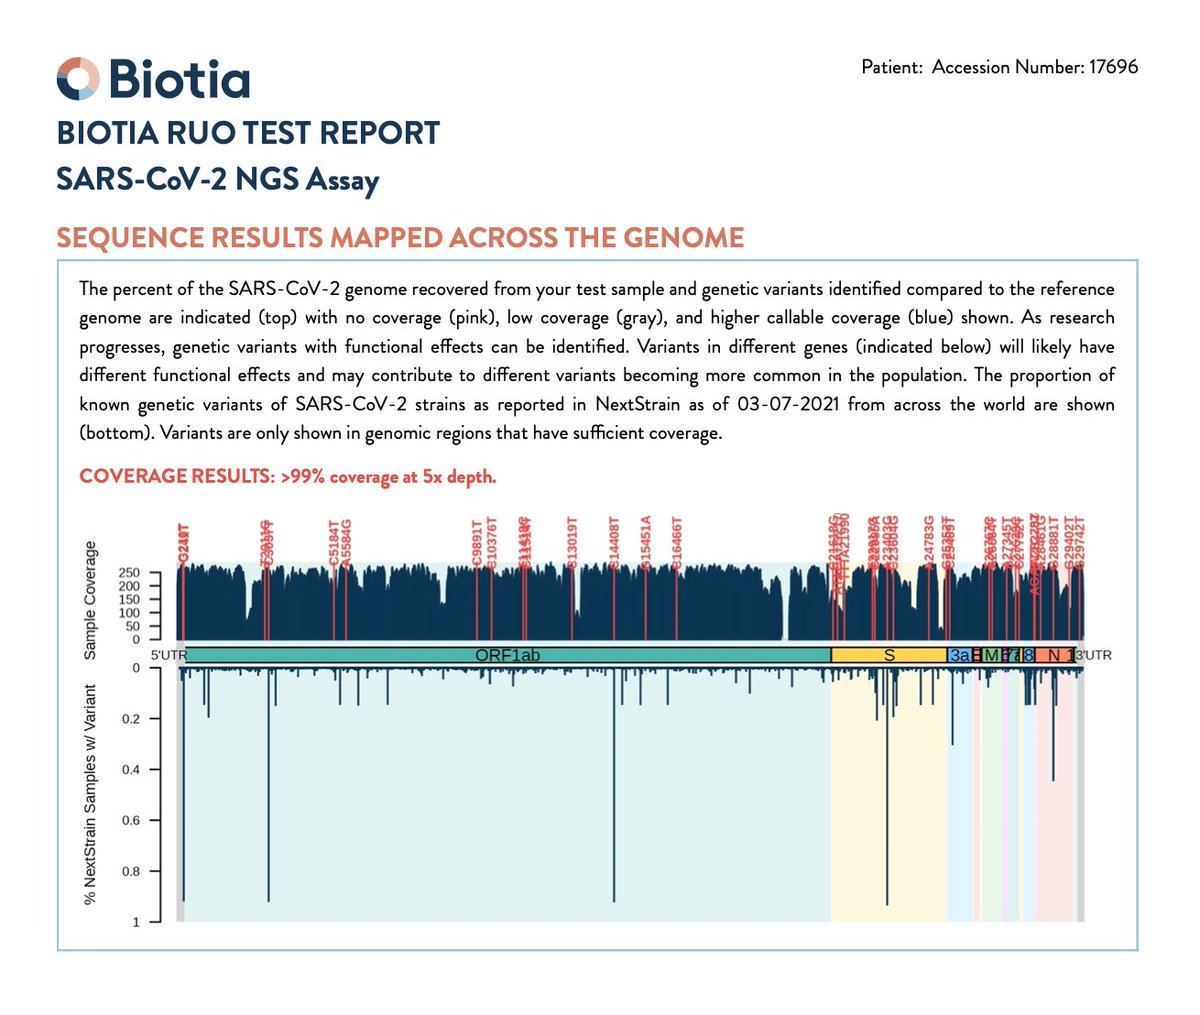 NEW PRODUCT RELEASE: Biotia's Newest Software for SARS-CoV-2 Genetic Surveillance Sees Rapid Adoption By Researchers Seeking Deeper Insights biospace.com/article/releas…